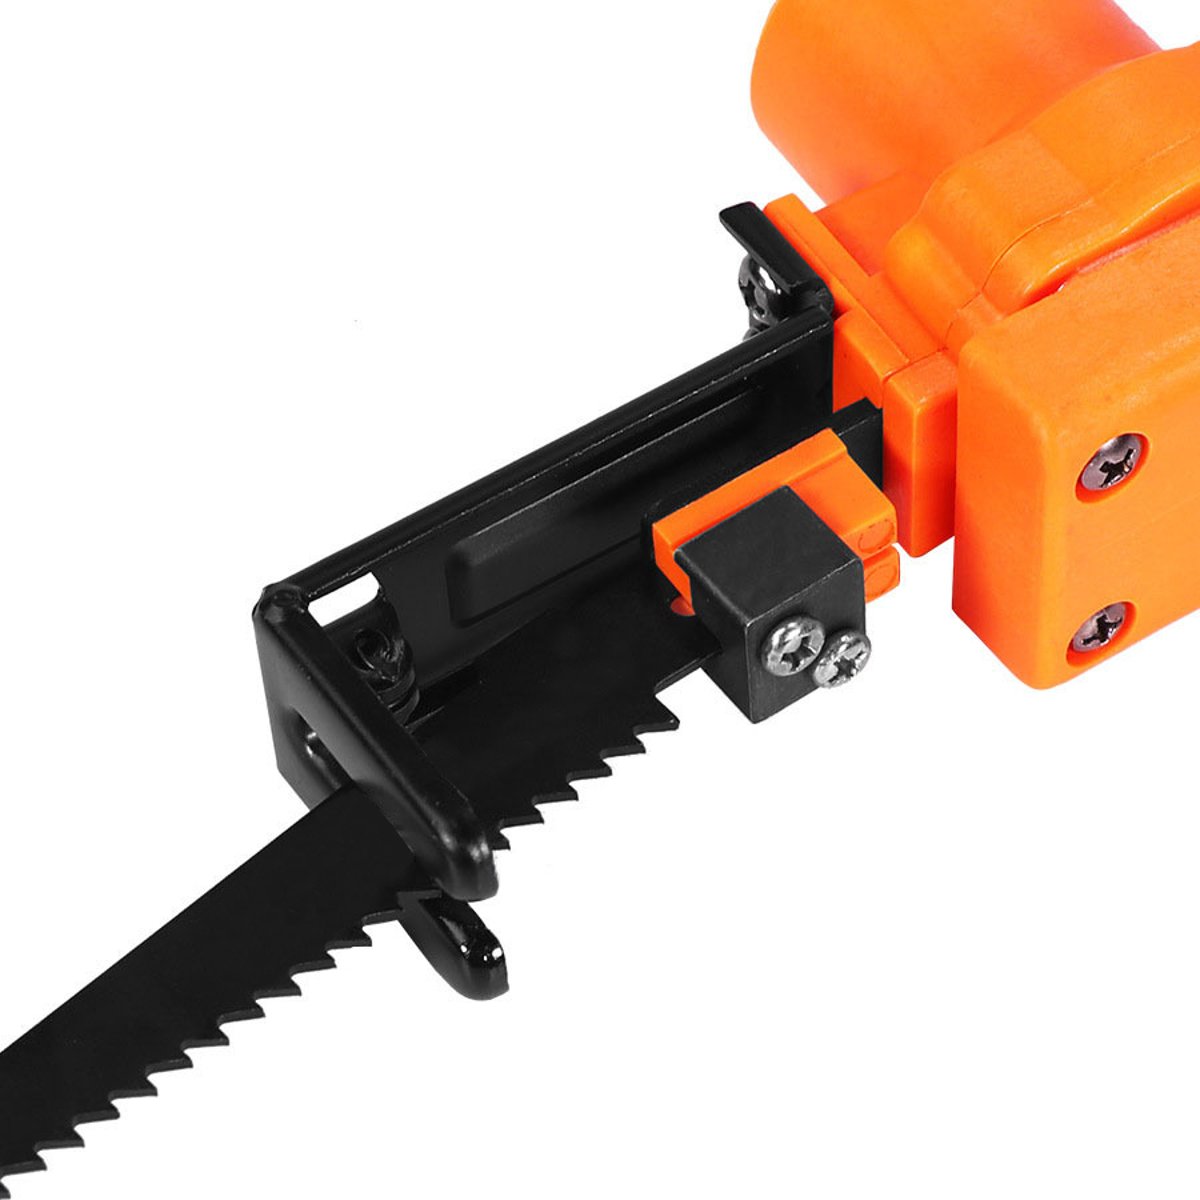 Reciprocating-Saw-Attachment-Adapter-Metal-Cutting-Tools-Electric-Drill-Attachment-2-Blades-1722798-7